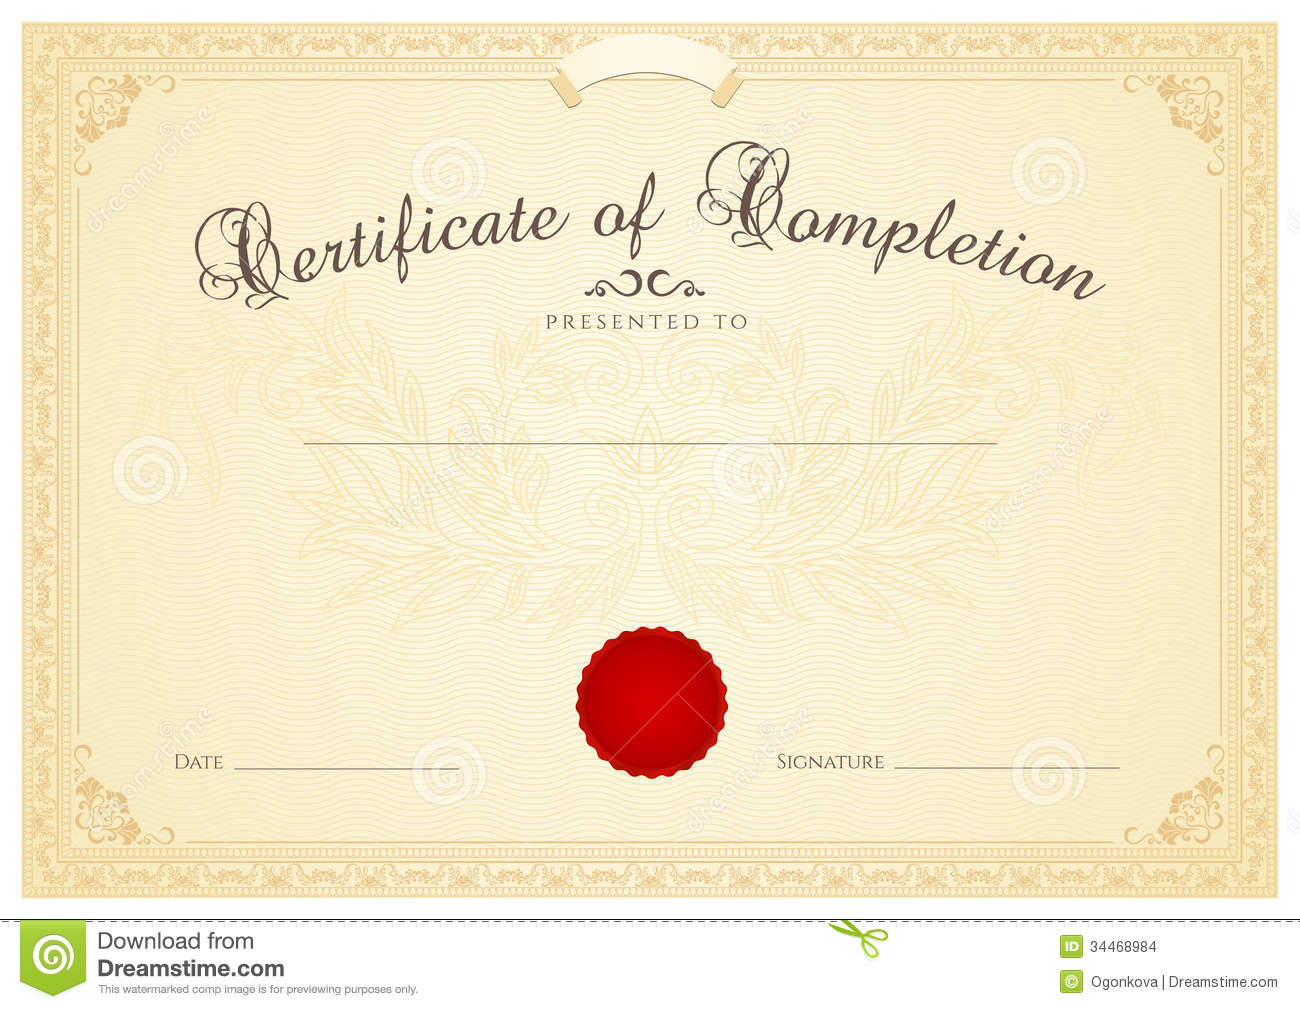 Certificate / Diploma Background Template